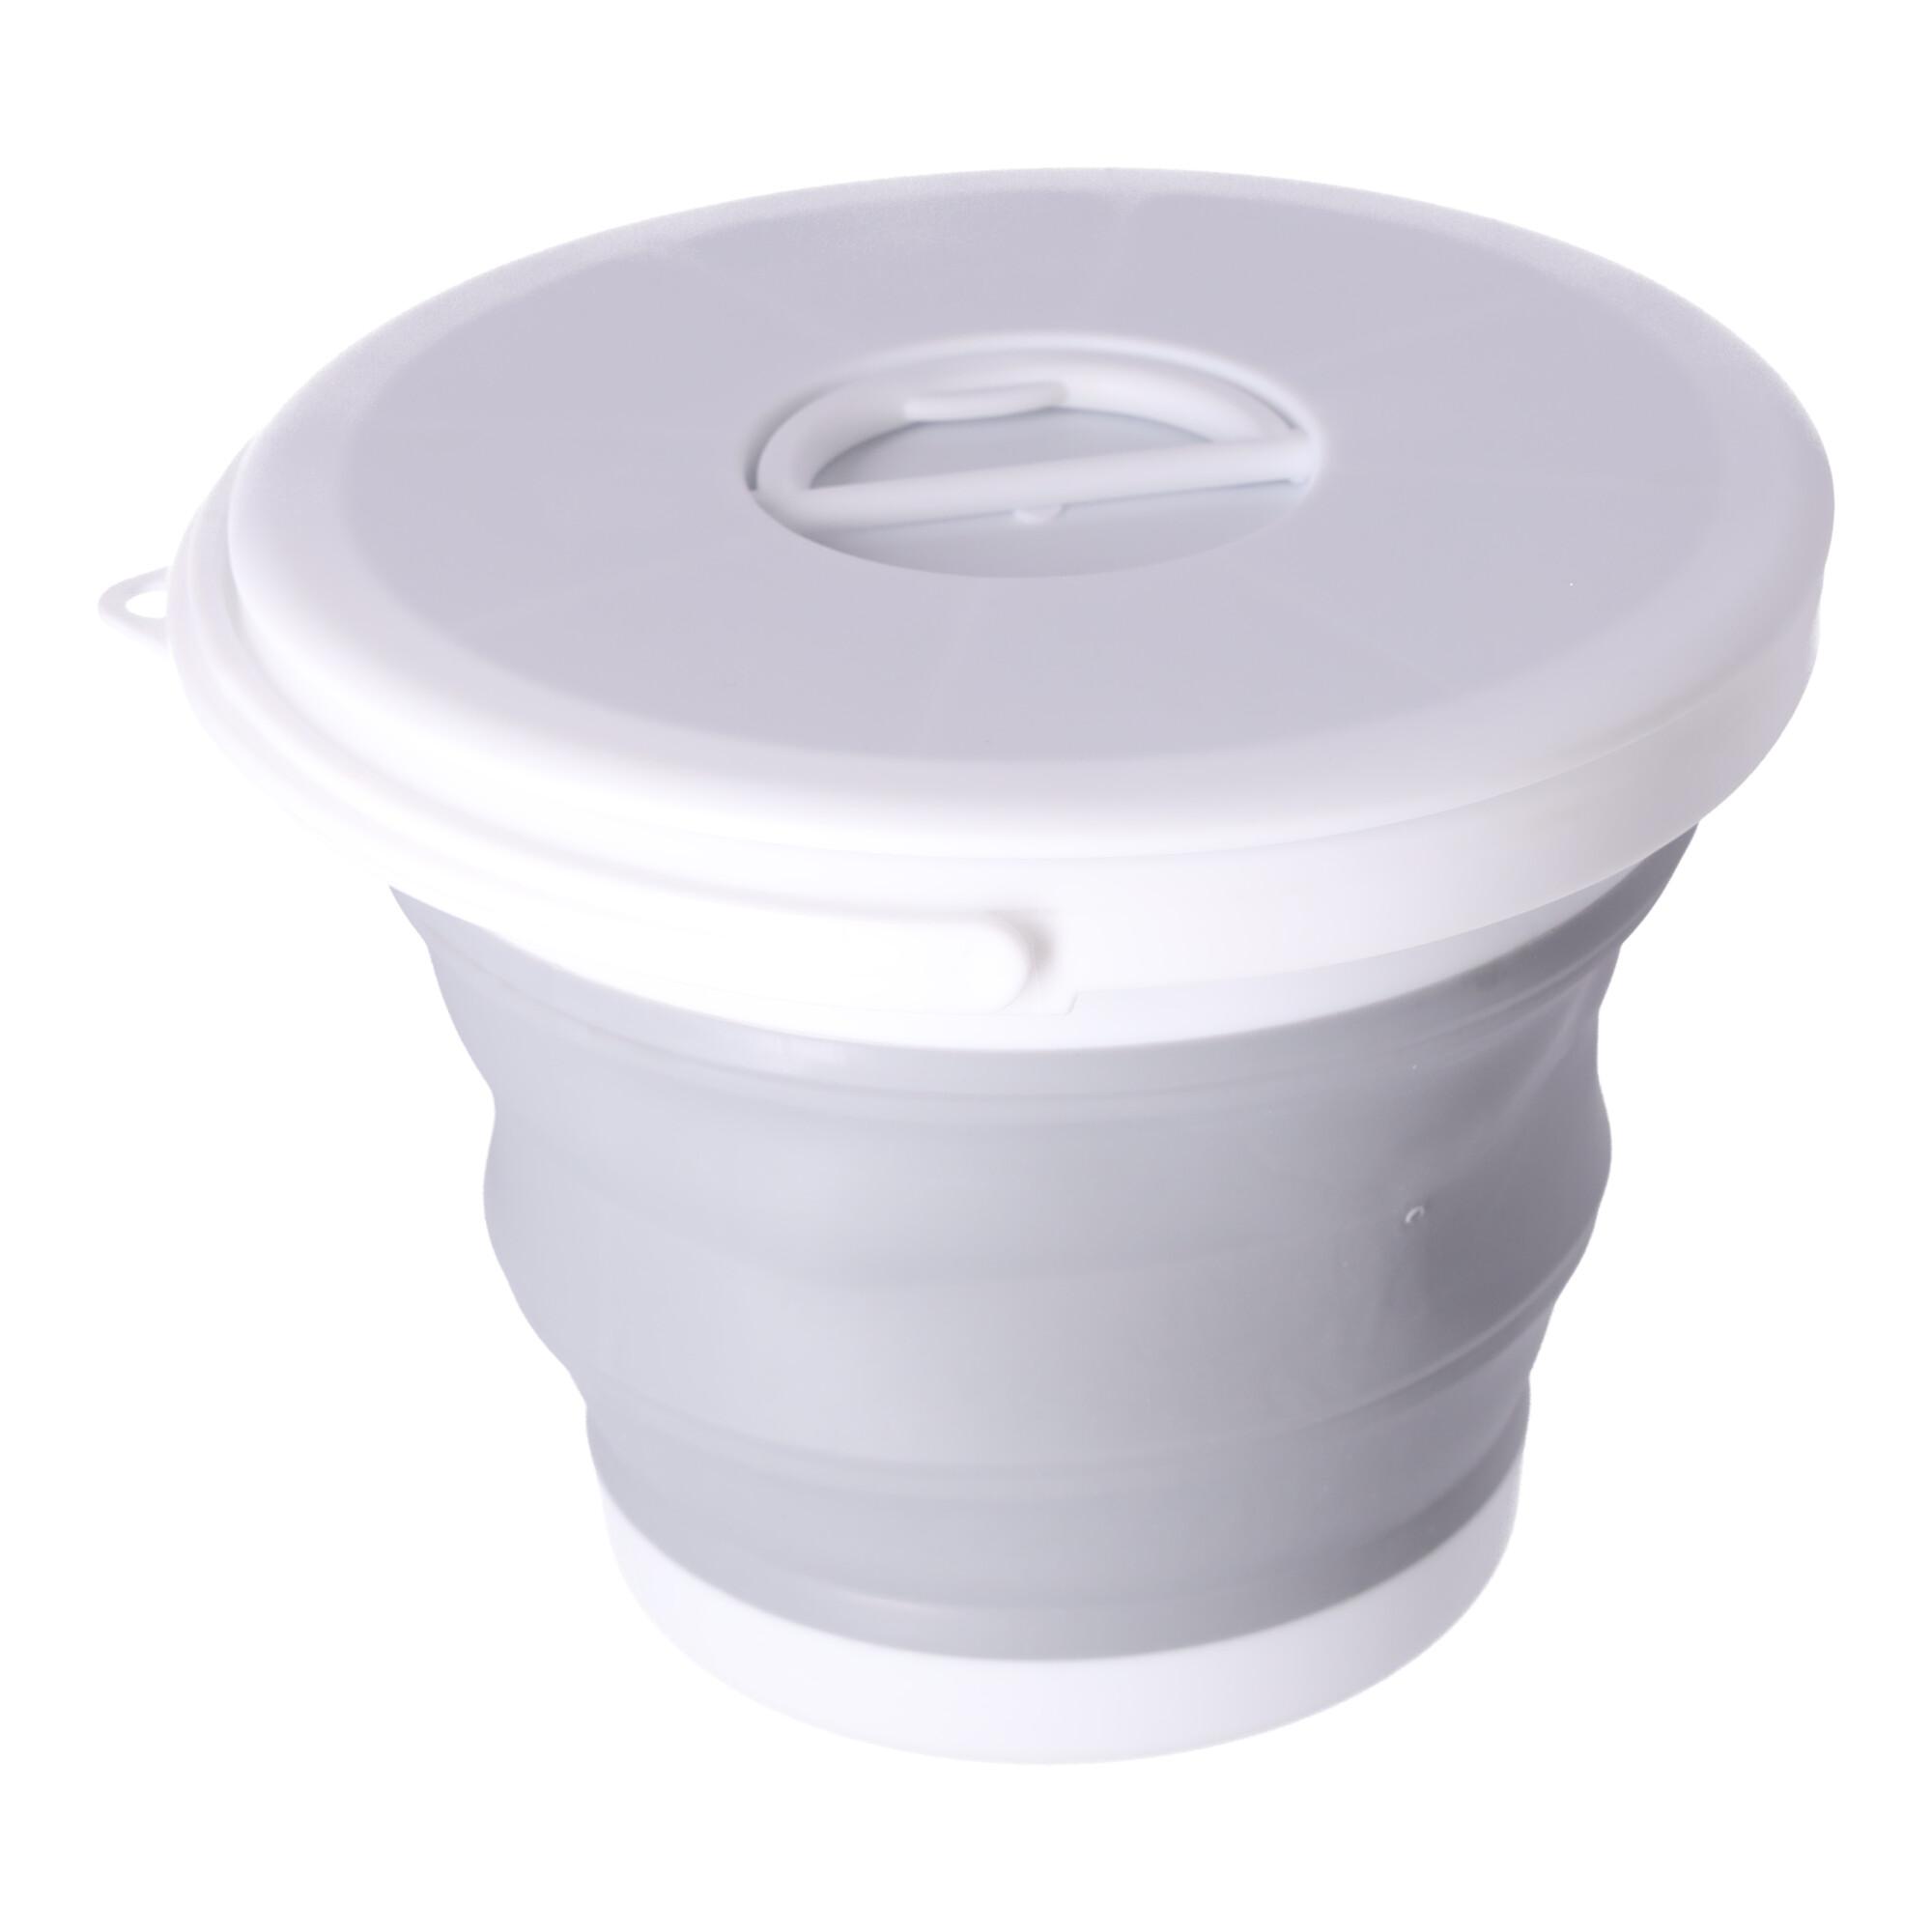 Silicone bucket 5L foldable - blue and white (with a lid)